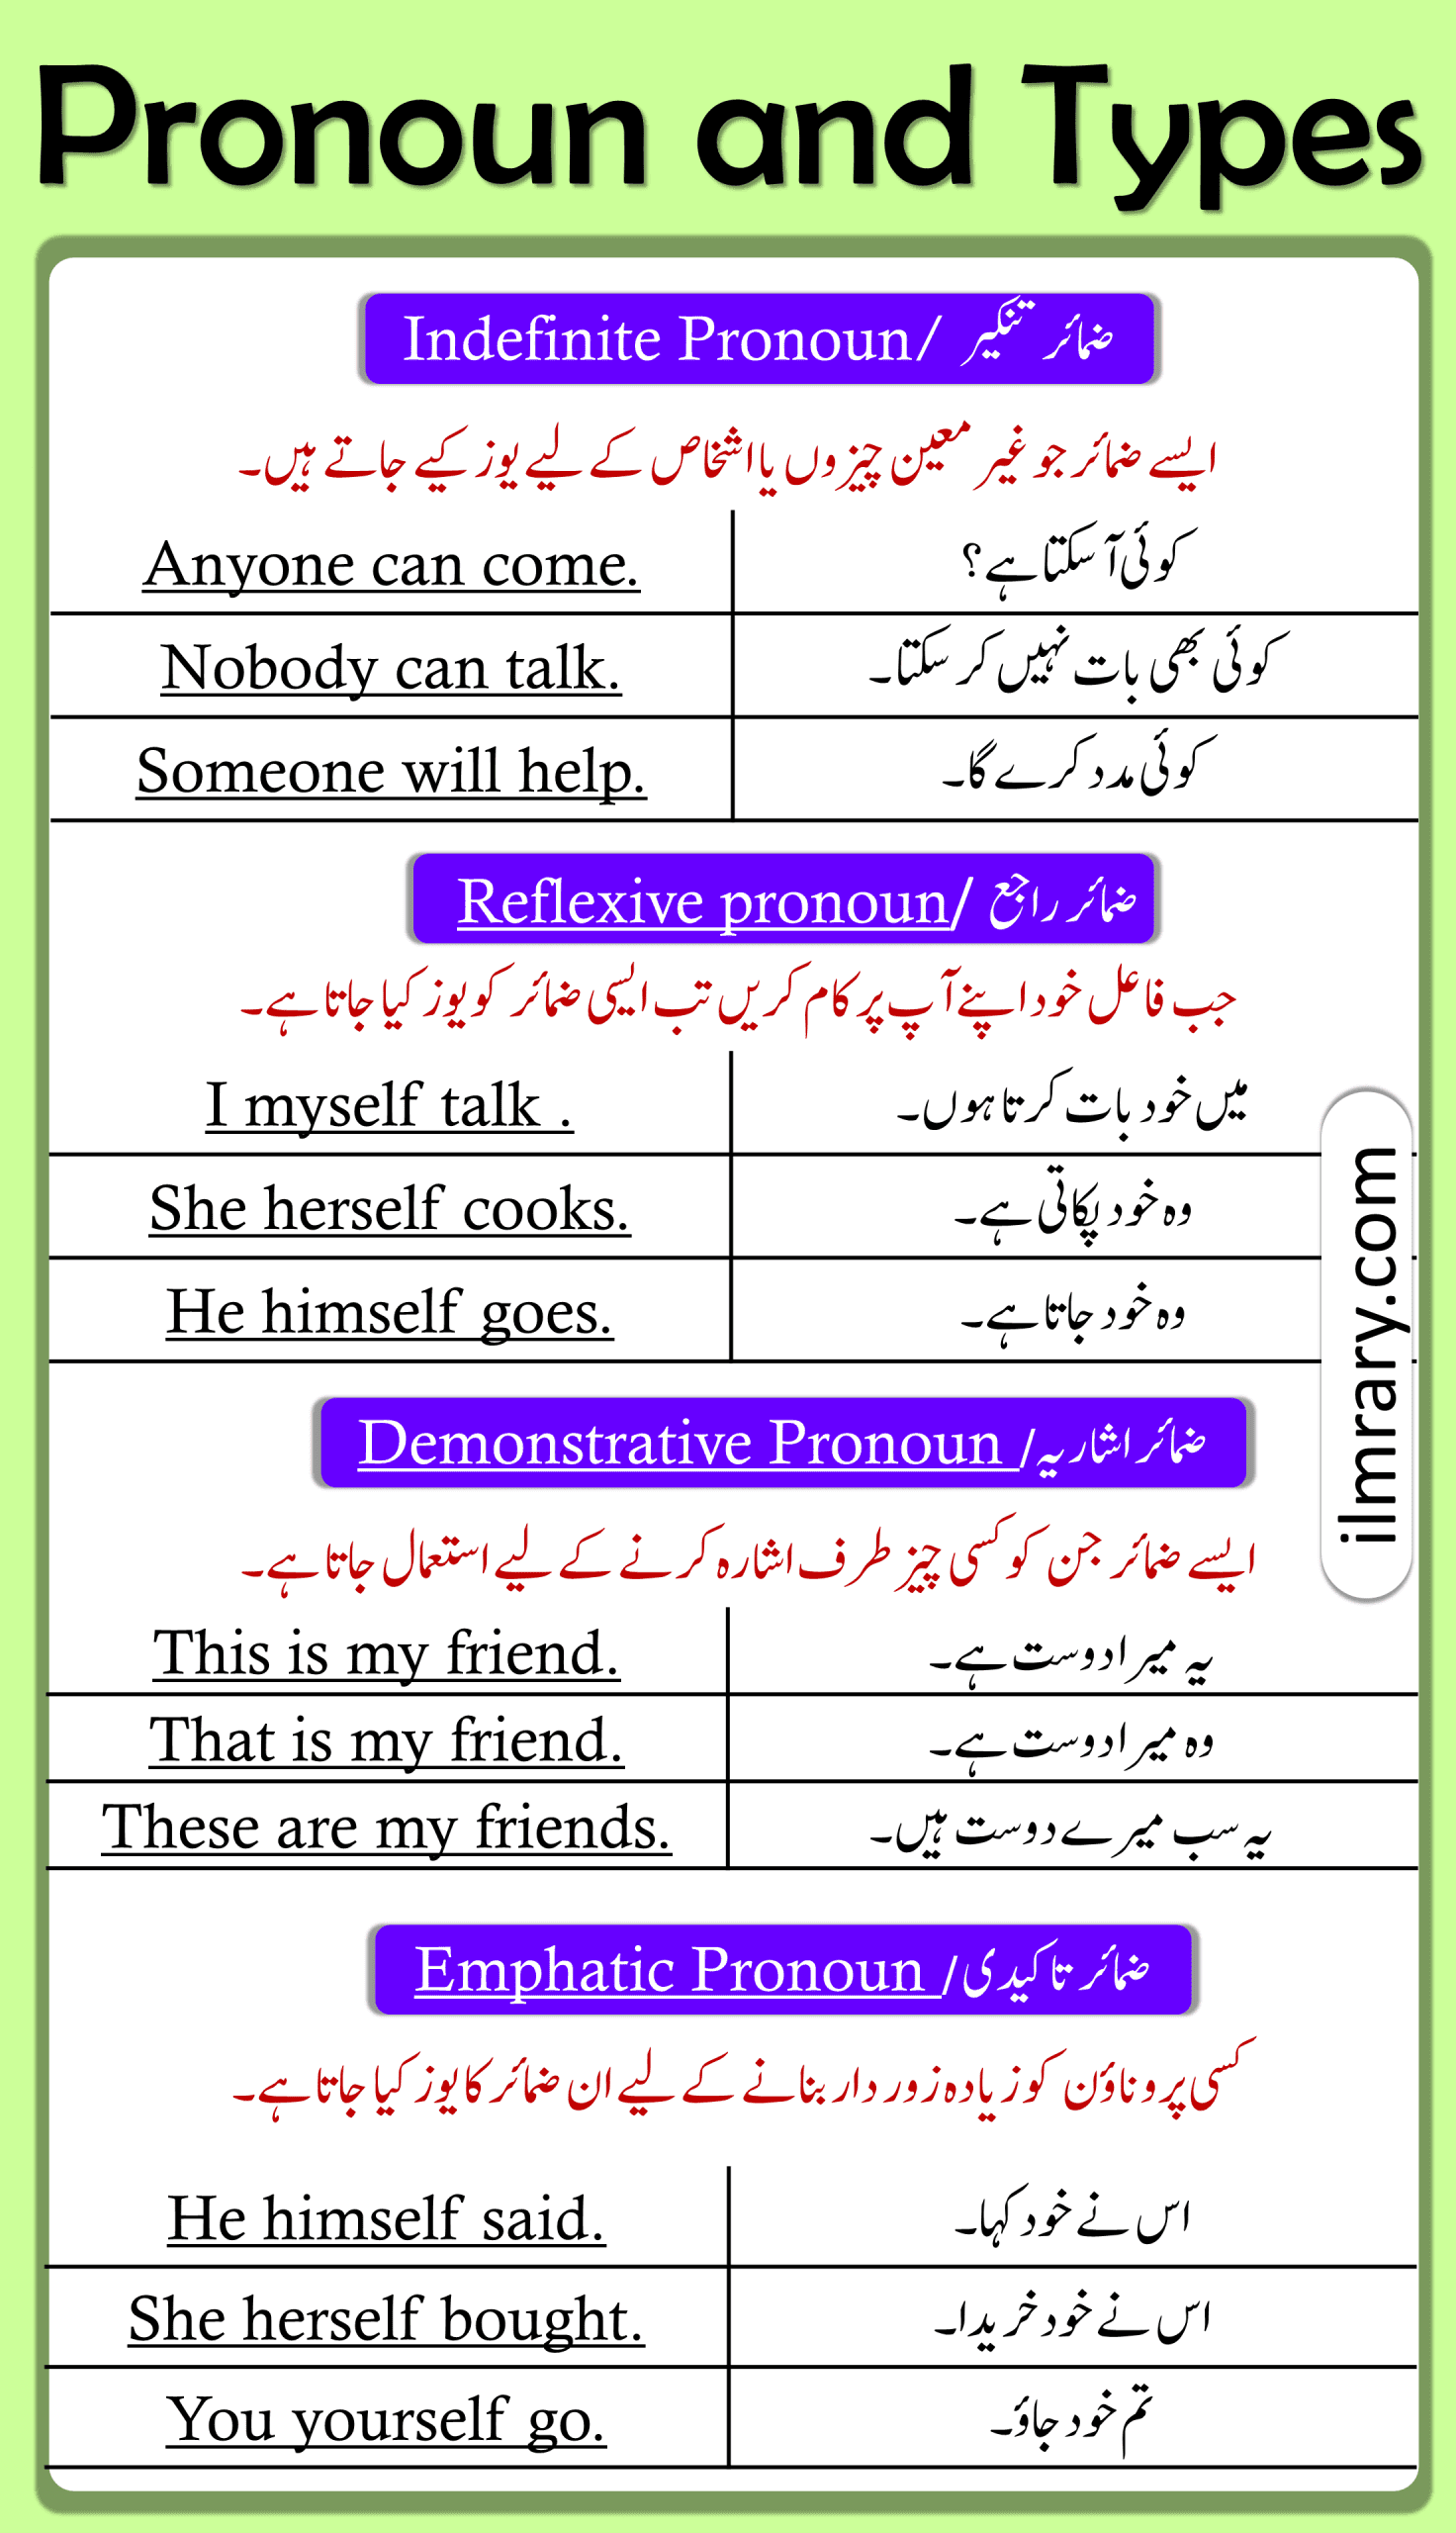 Pronoun Definition and Their Types in English | Parts of Speech in Urdu. All Types of Pronoun in English with Example